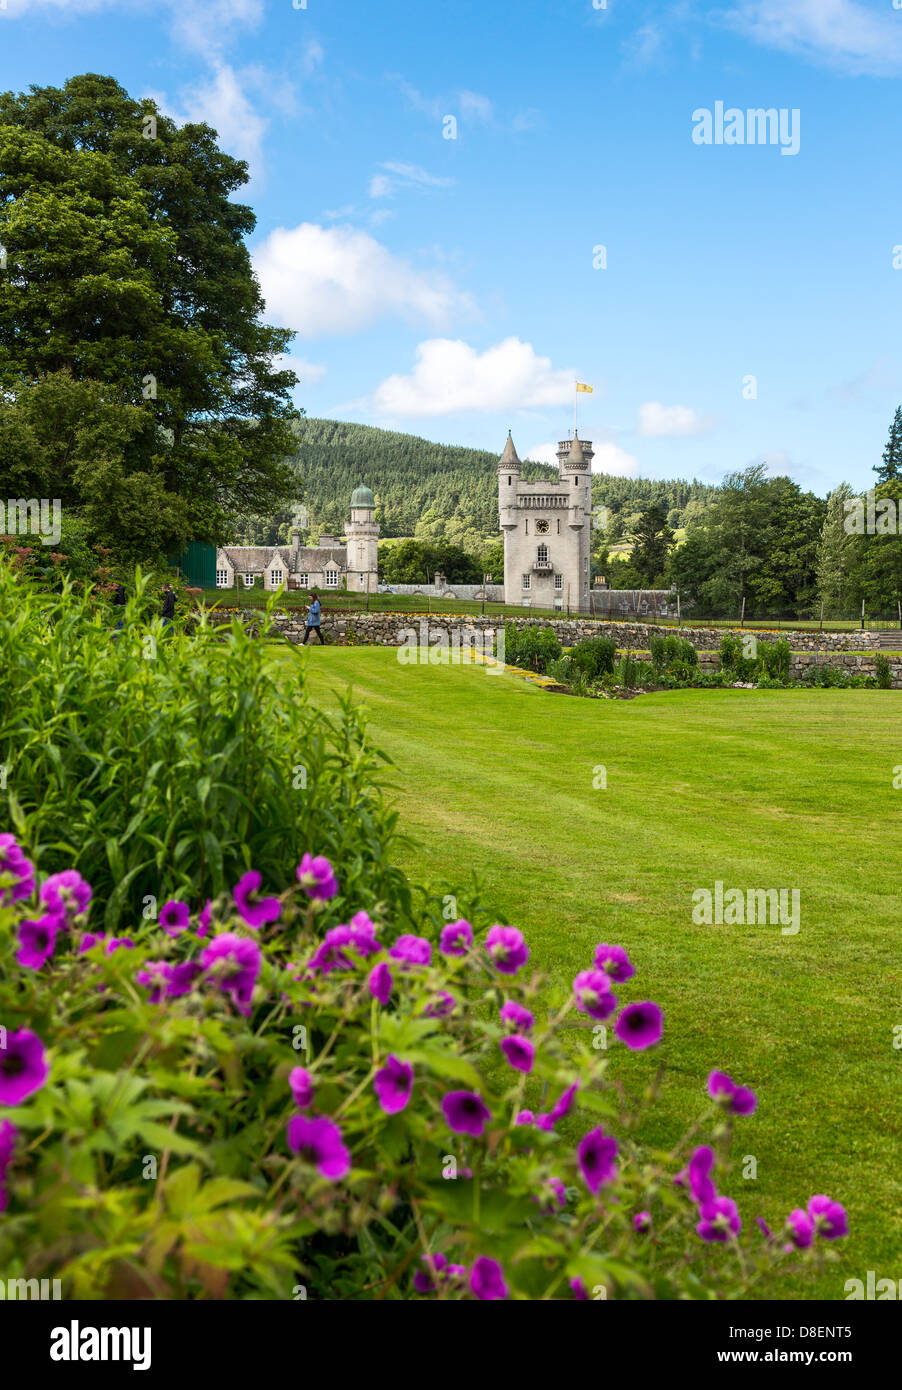 Great Britain, Scotland, Aberdeenshire, the gardens of the Balmoral castle, summer residence of the British Royal Family. Stock Photo